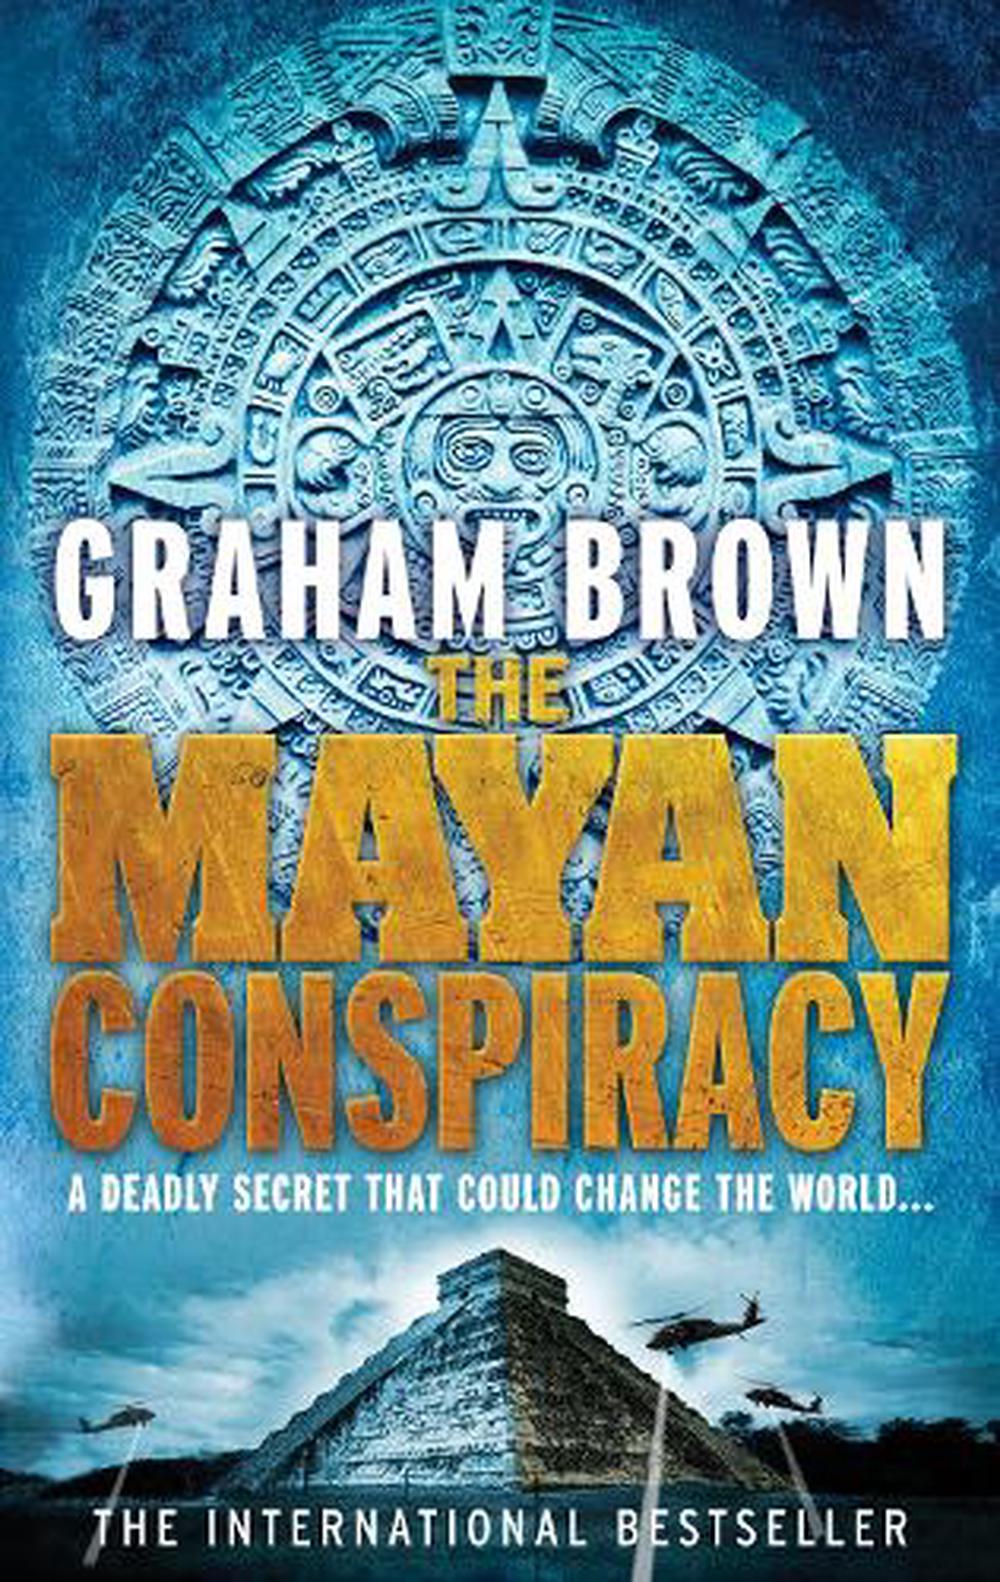 Mayan Conspiracy by Graham Brown, Paperback, 9780091943080 Buy online